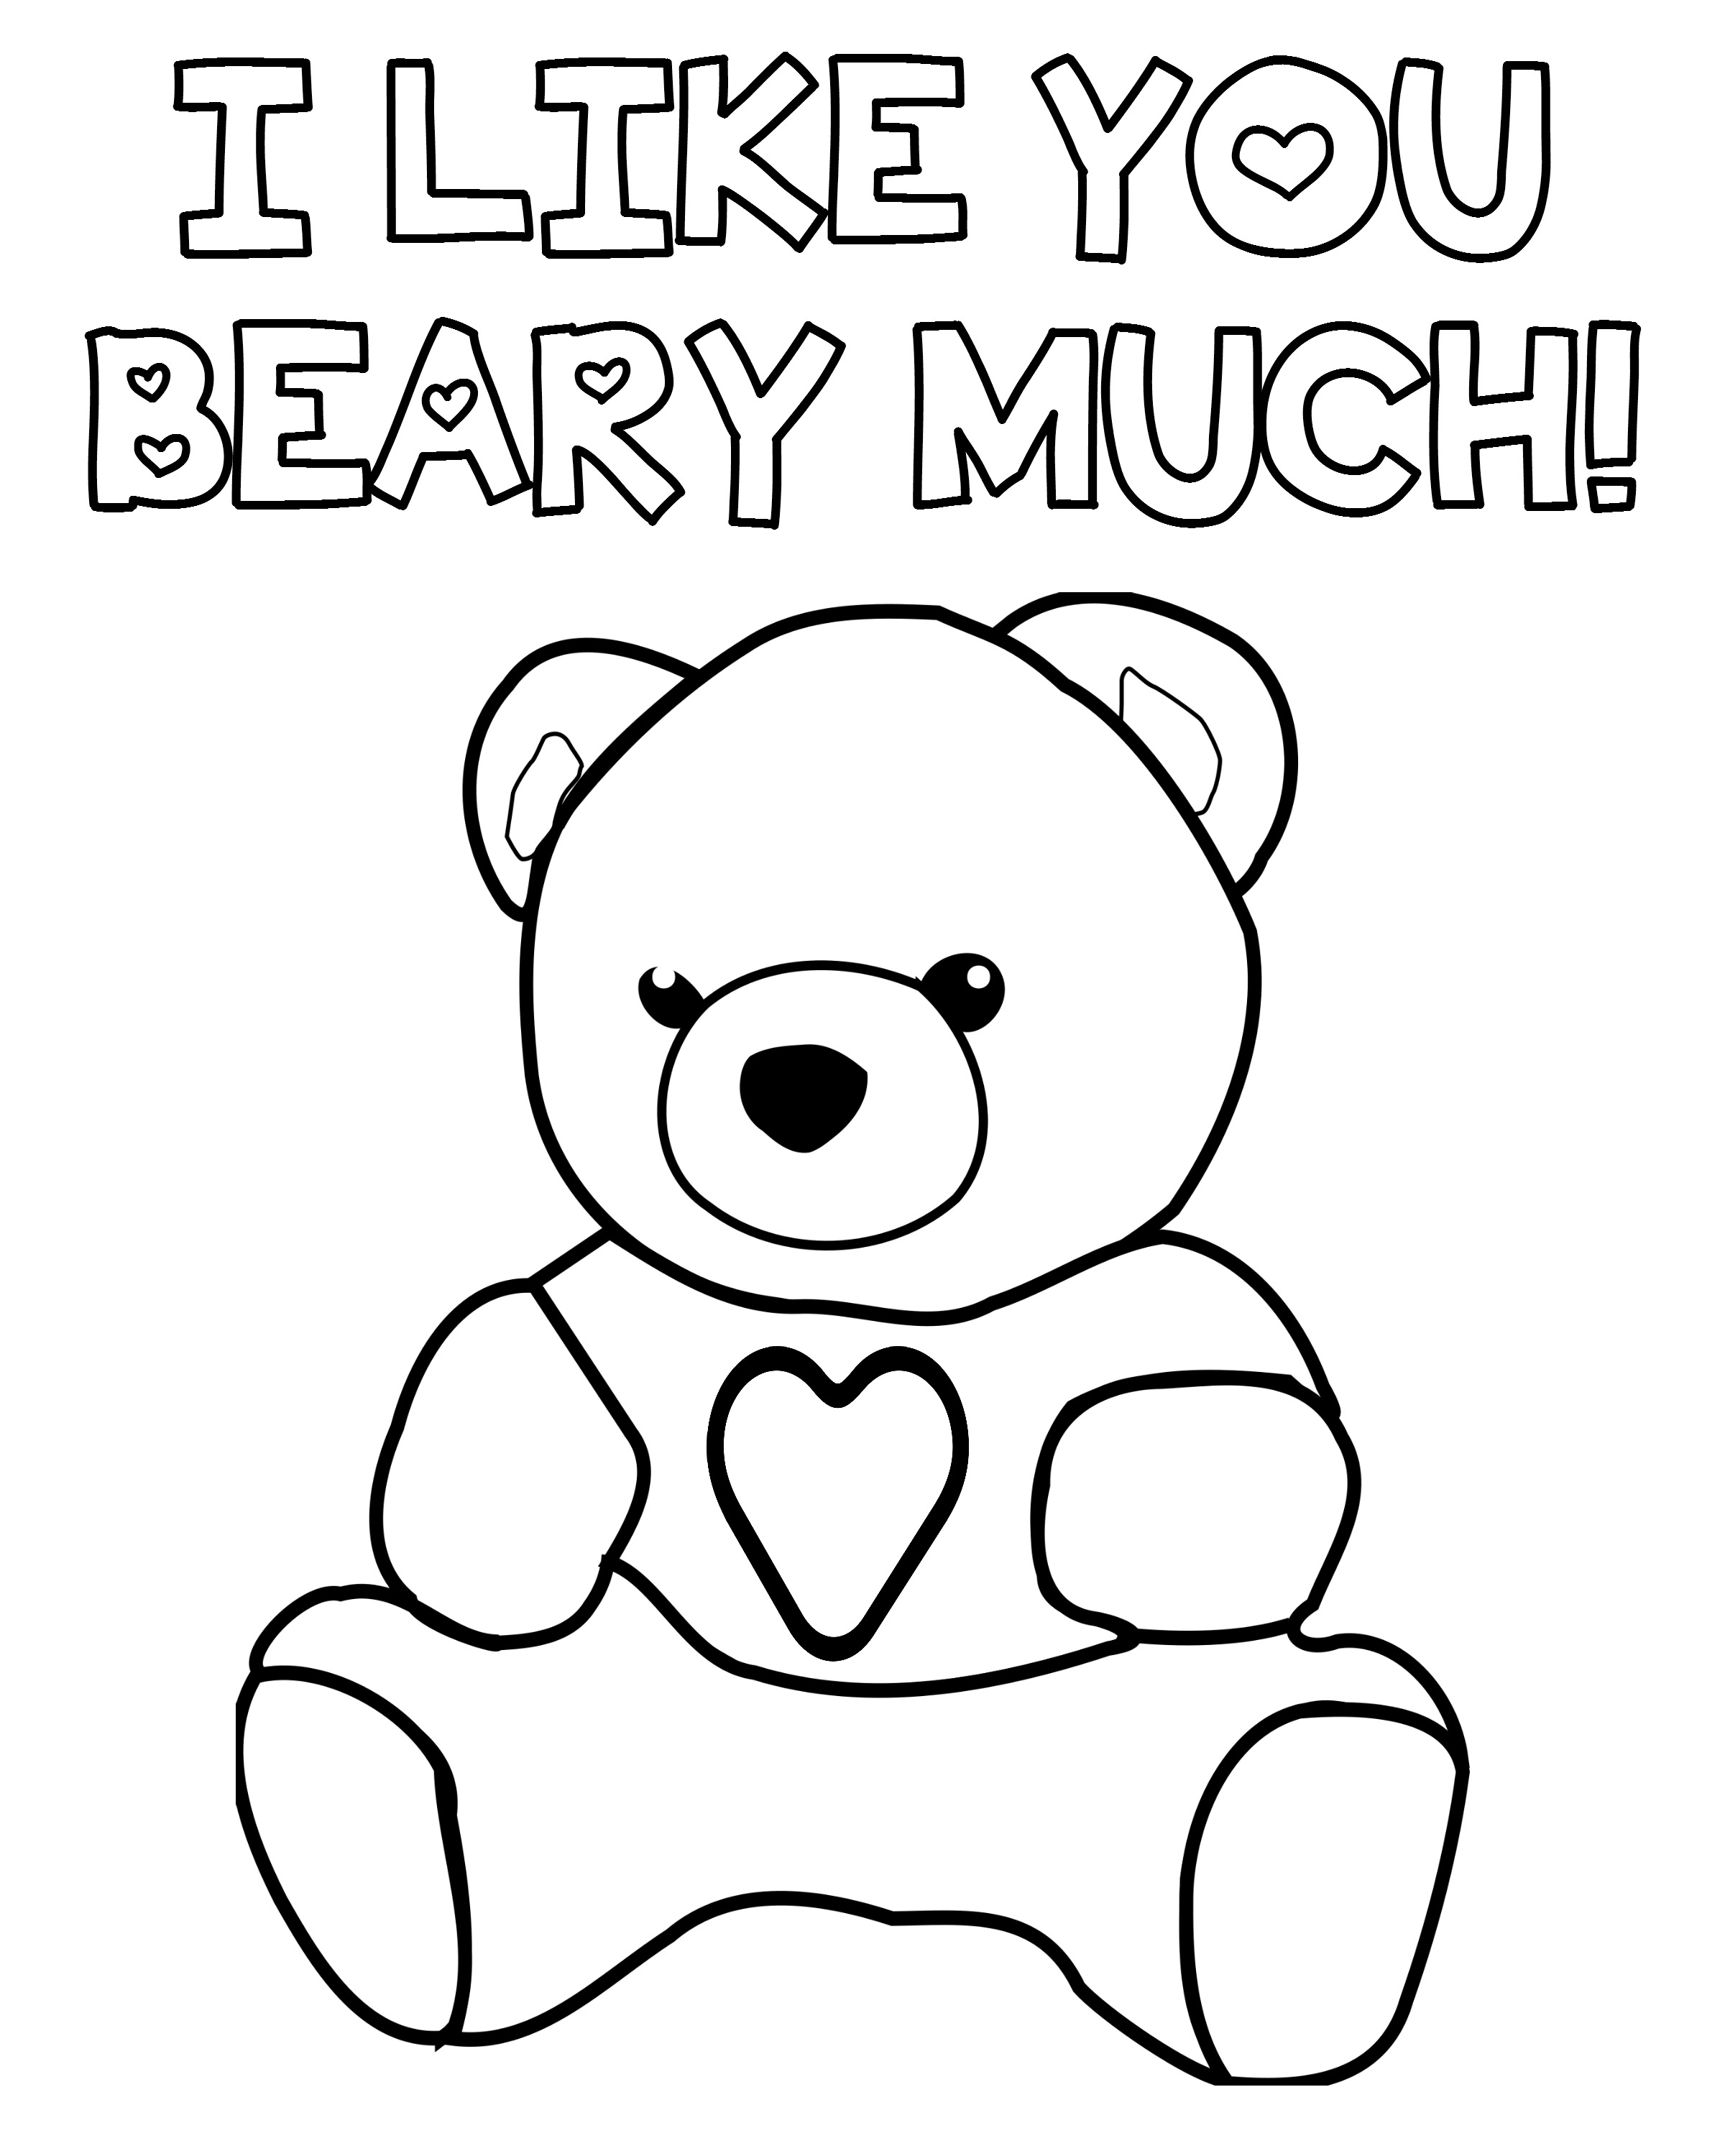 I Like You Beary Much   Teddy Bear Valentine's Day Coloring Page ...